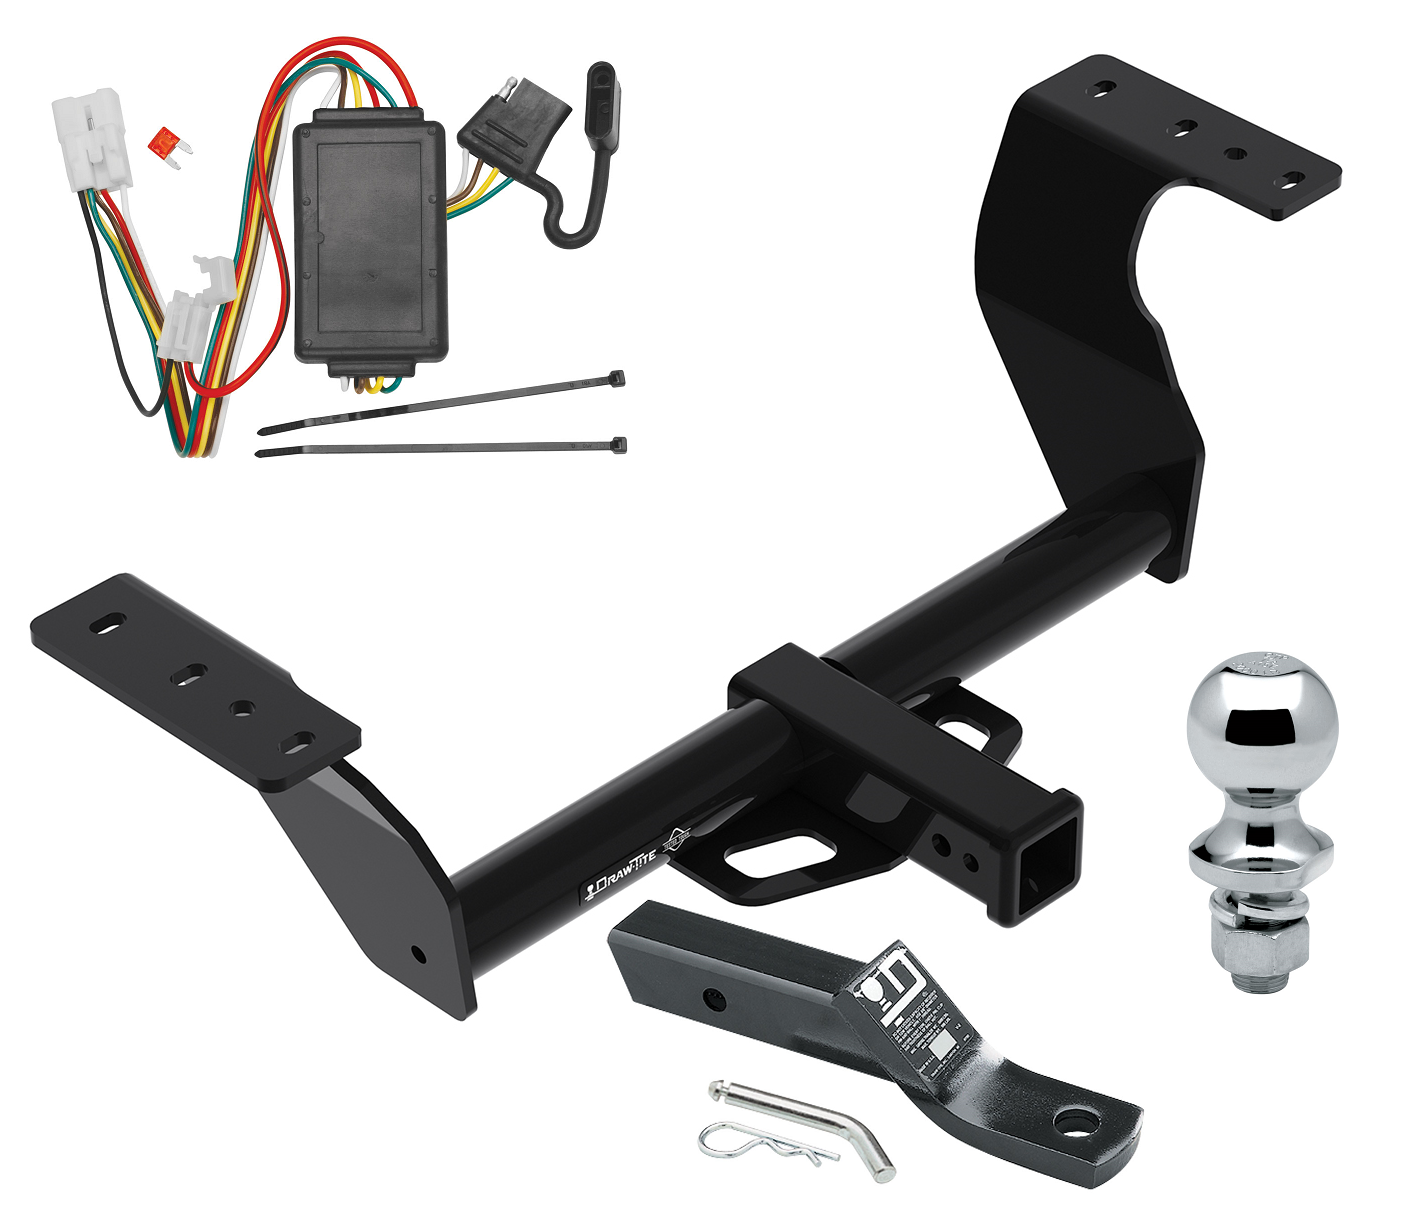 Trailer Tow Hitch For 2019 Subaru Forester Complete